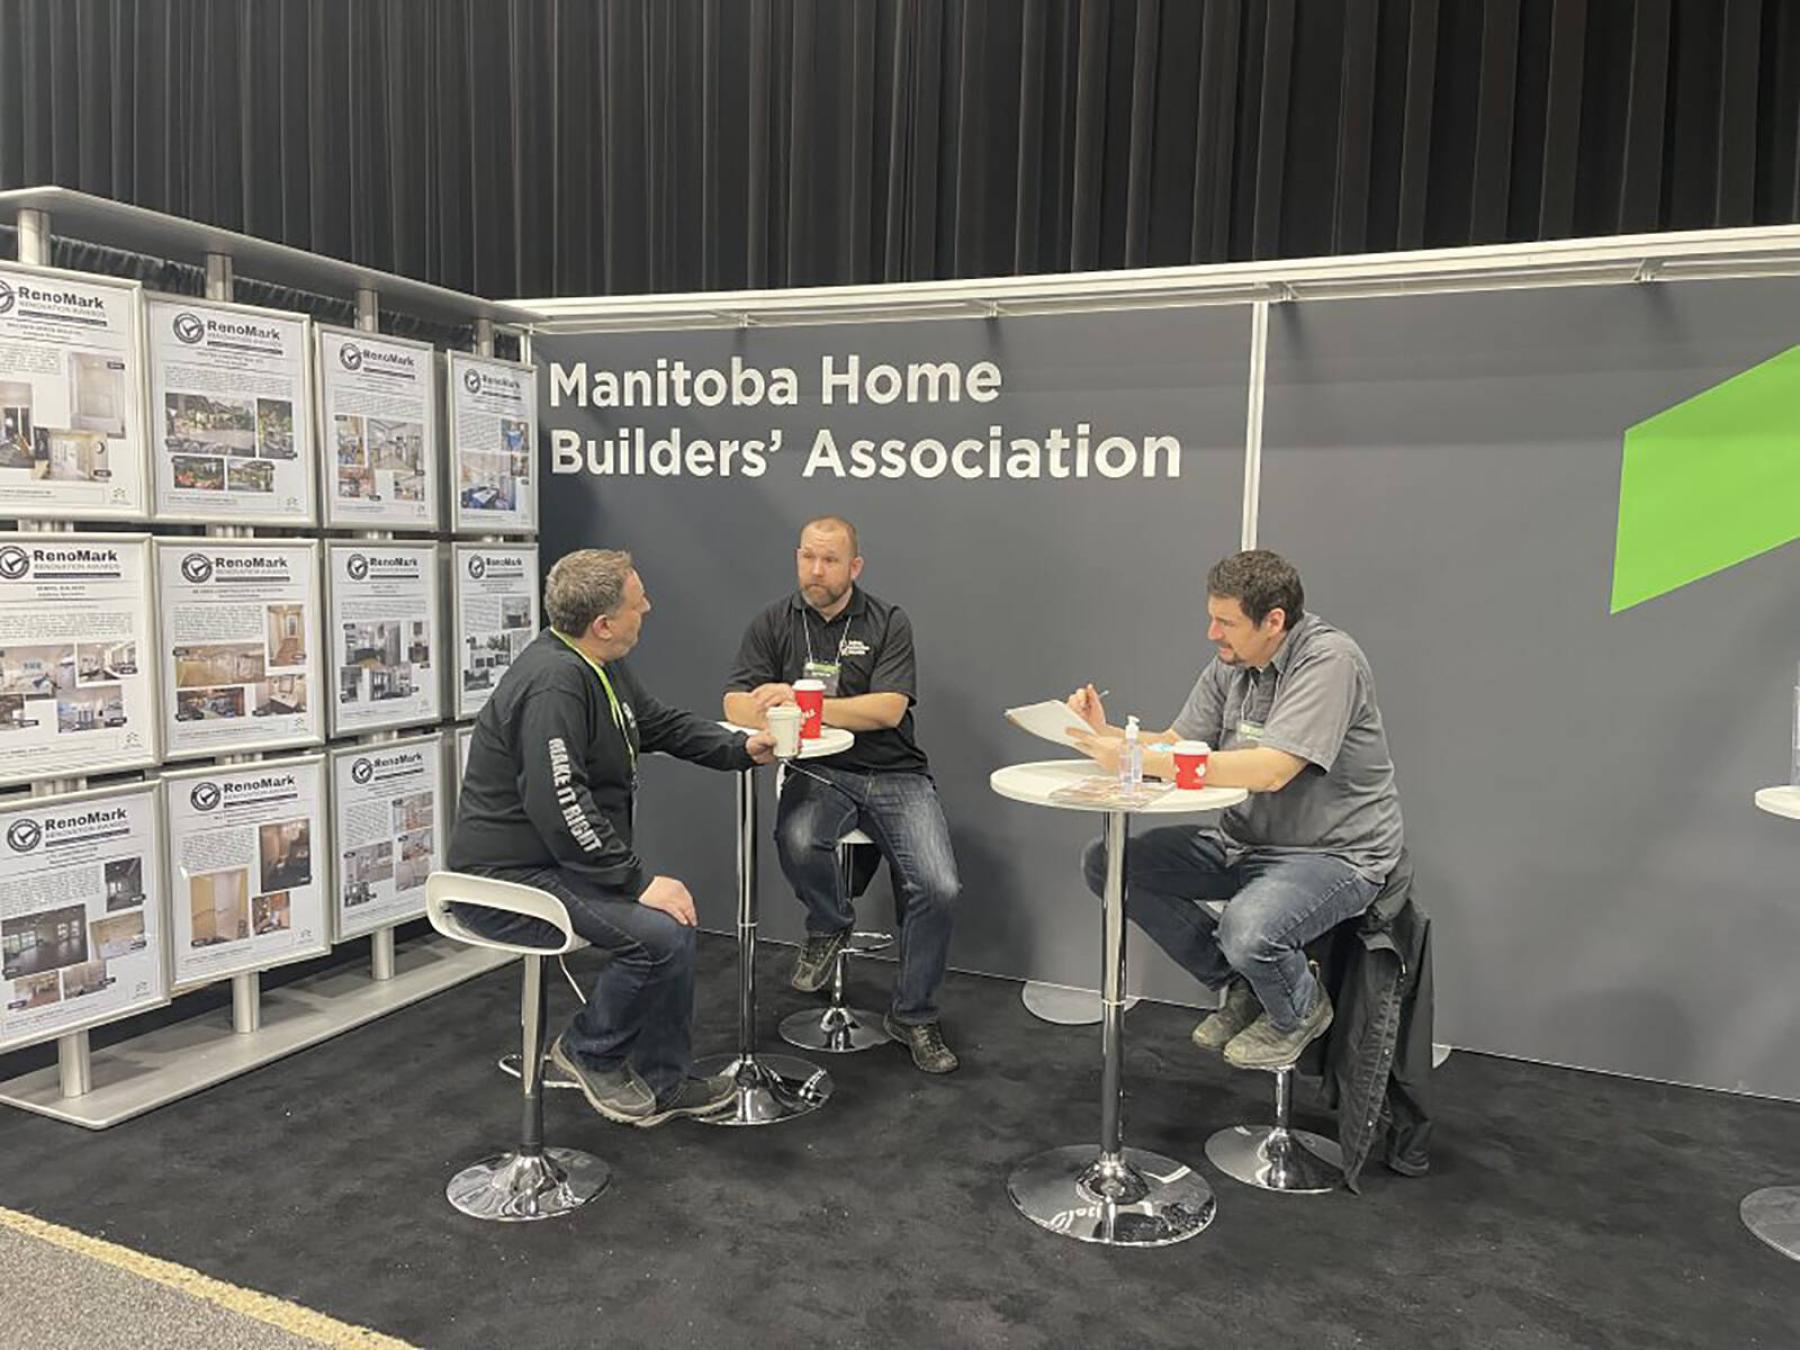  <p>Manitoba Home Builders&rsquo; Association</p>
                                <p>The Ask a Renovator booth is staffed by MHBA members who are available to answer your questions about an upgrade or renovation project.</p> 